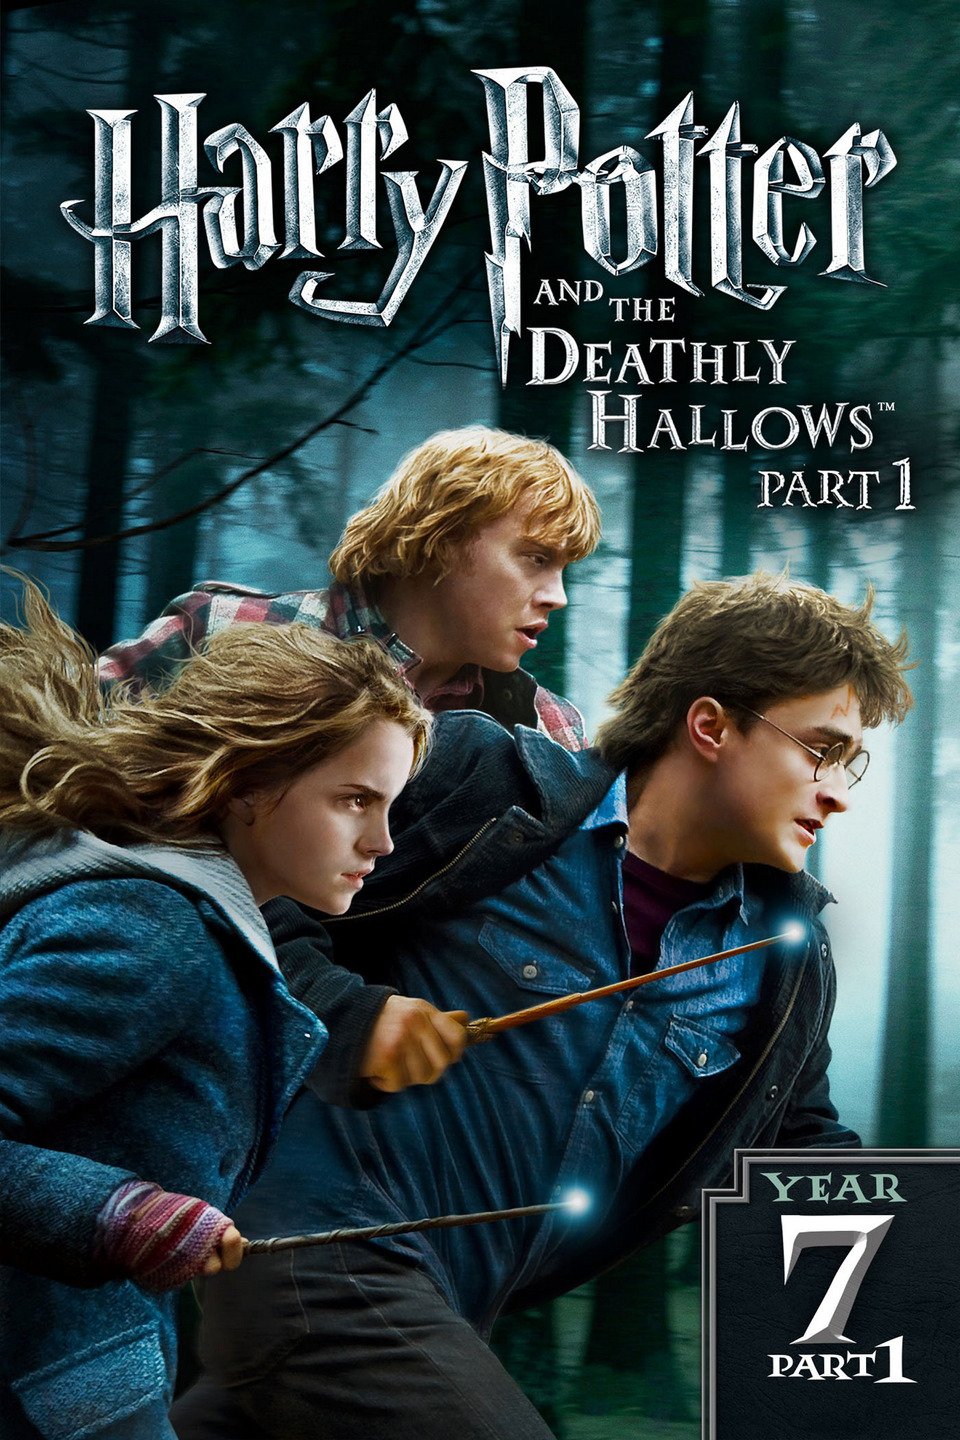 harry potter deathly hallows part 1 poster